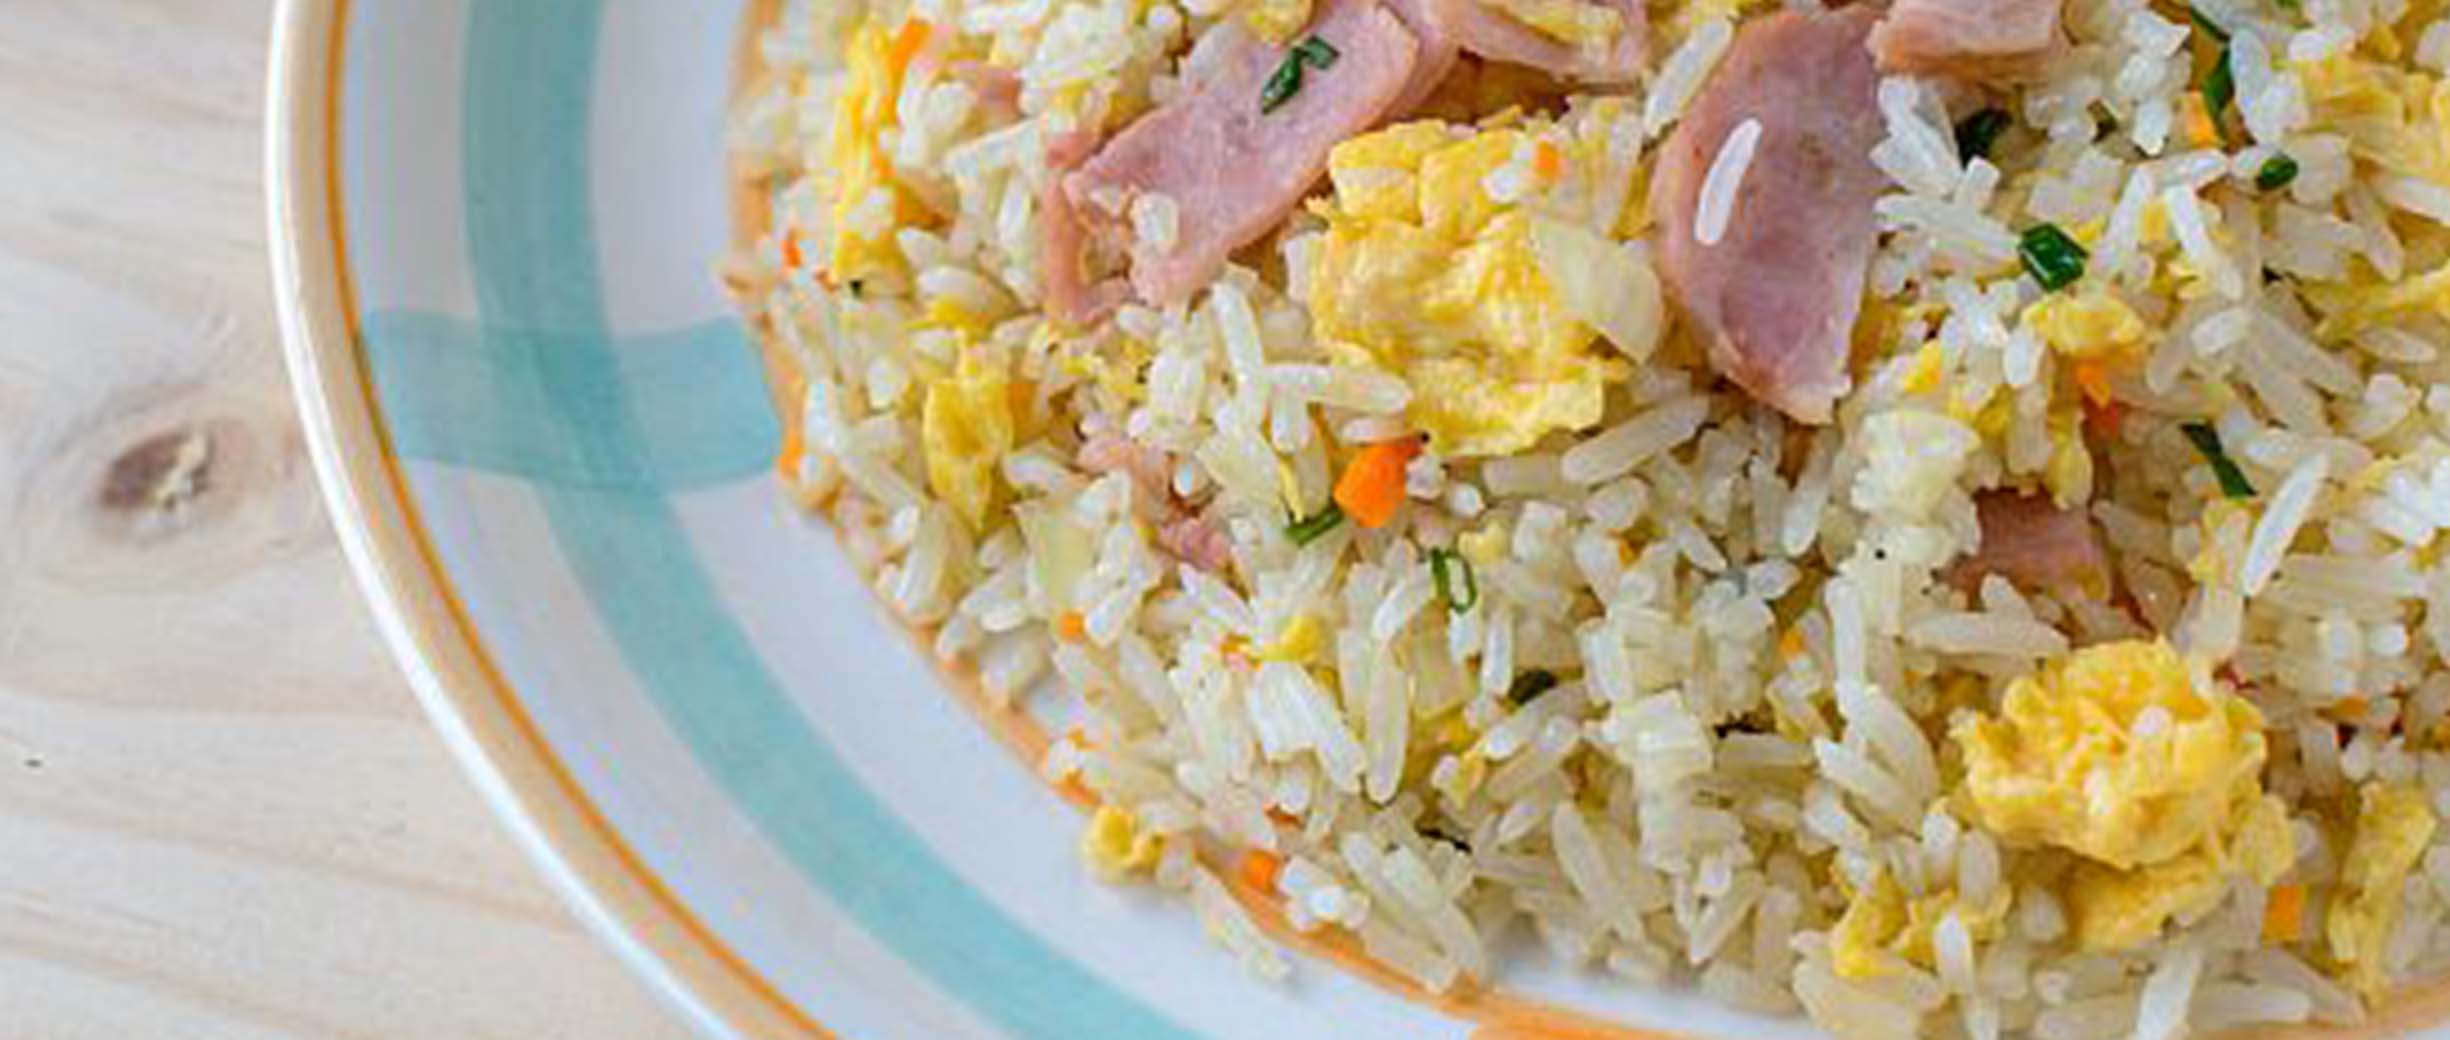 How to Cook Rice Without Burning It